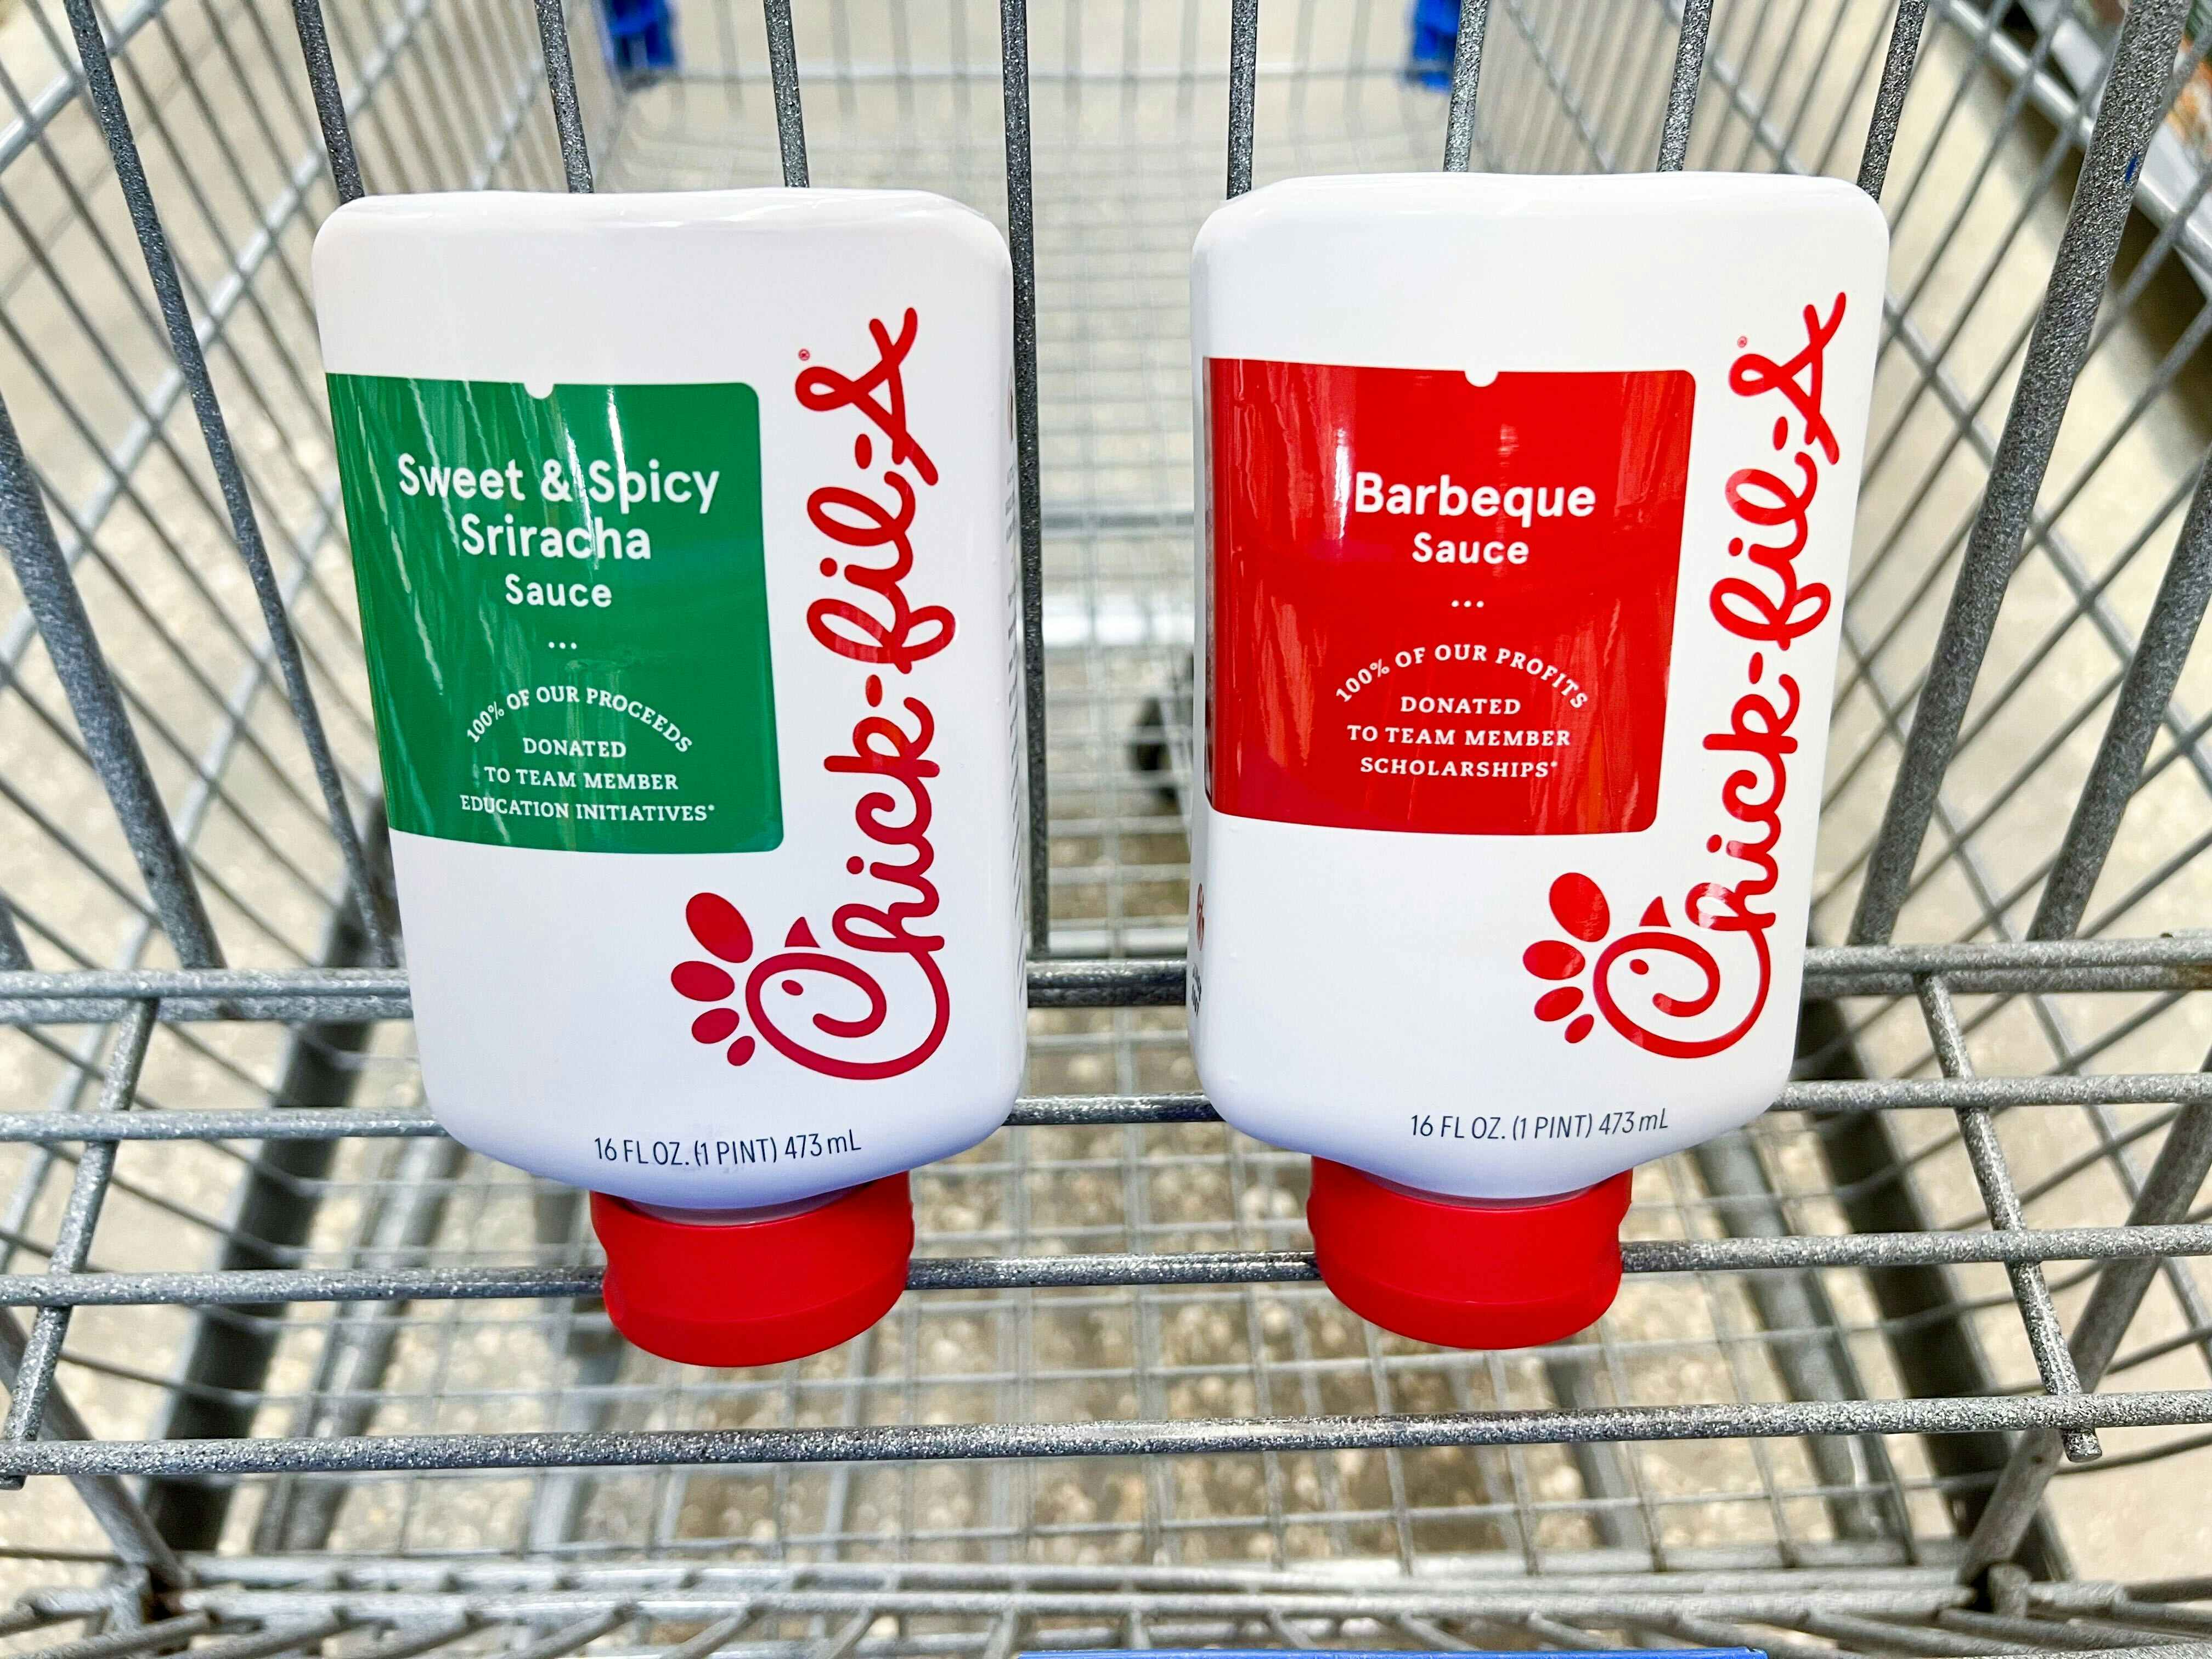 Bottles of Chick-fil-A barbeque and sweet & spicy sriracha sauce in a Walmart cart